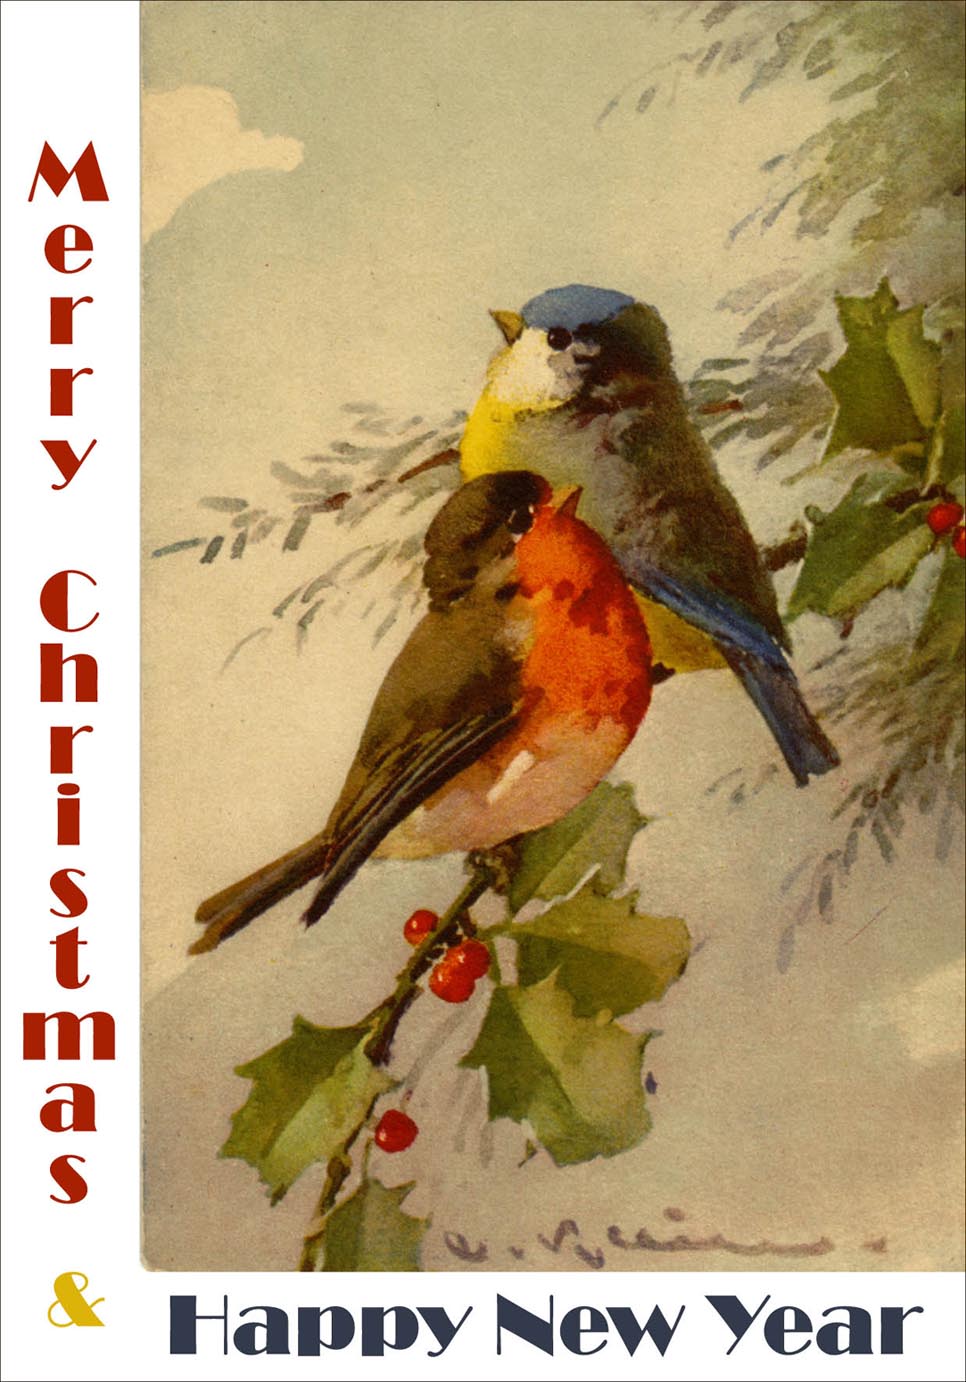 Vintage New Year and Christmas greeting card with 2 colorful winter birds